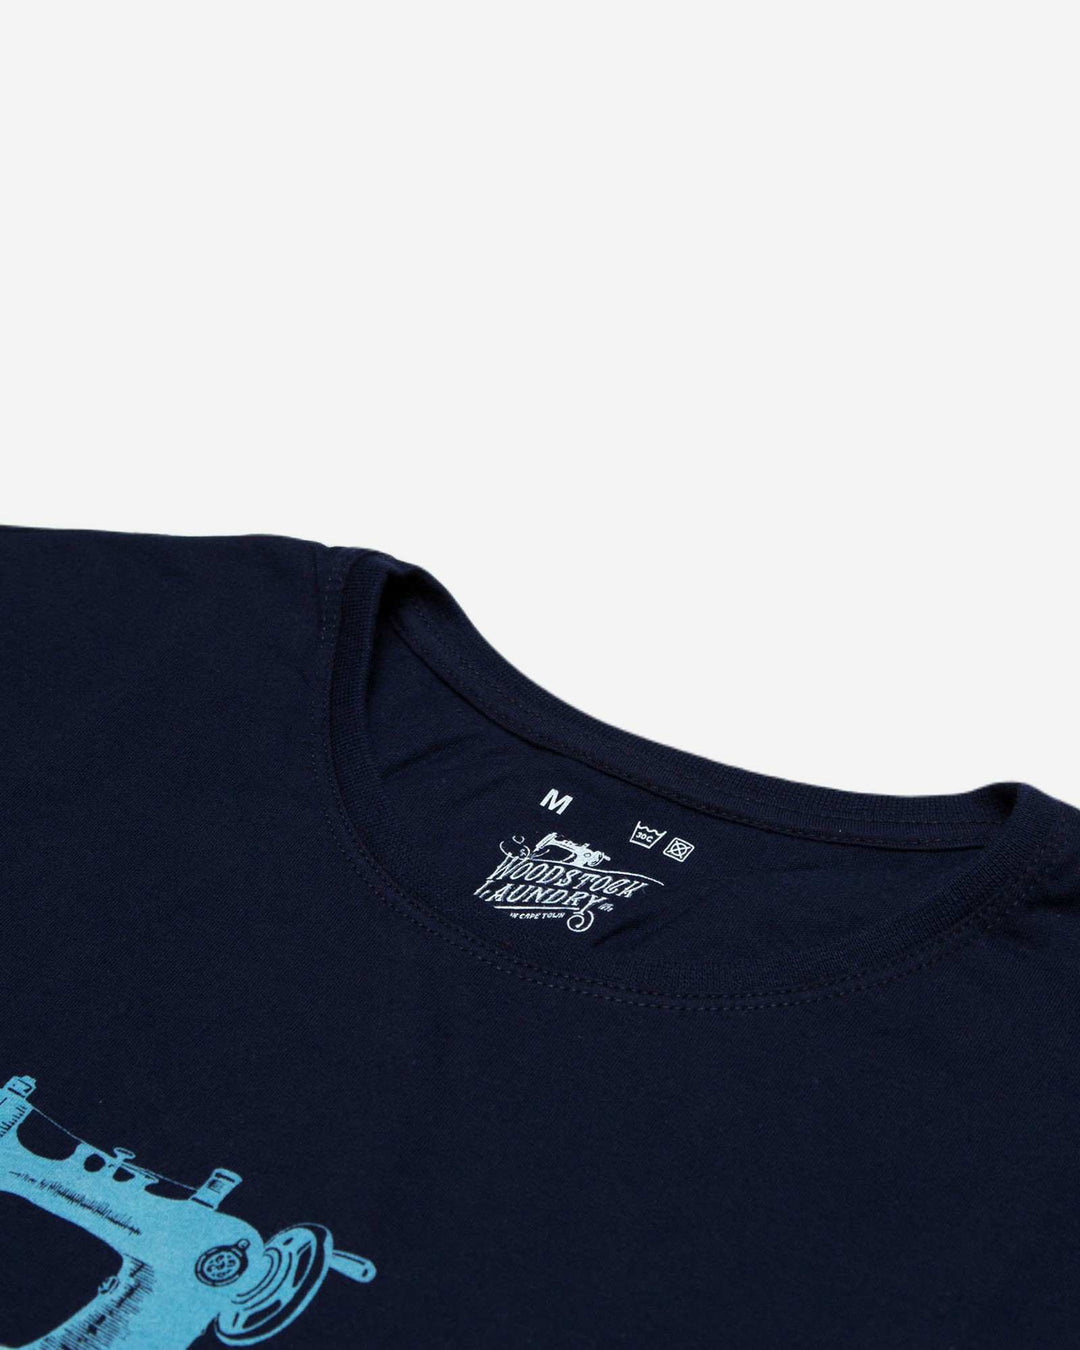 Mens navy t-shirt with blue logo